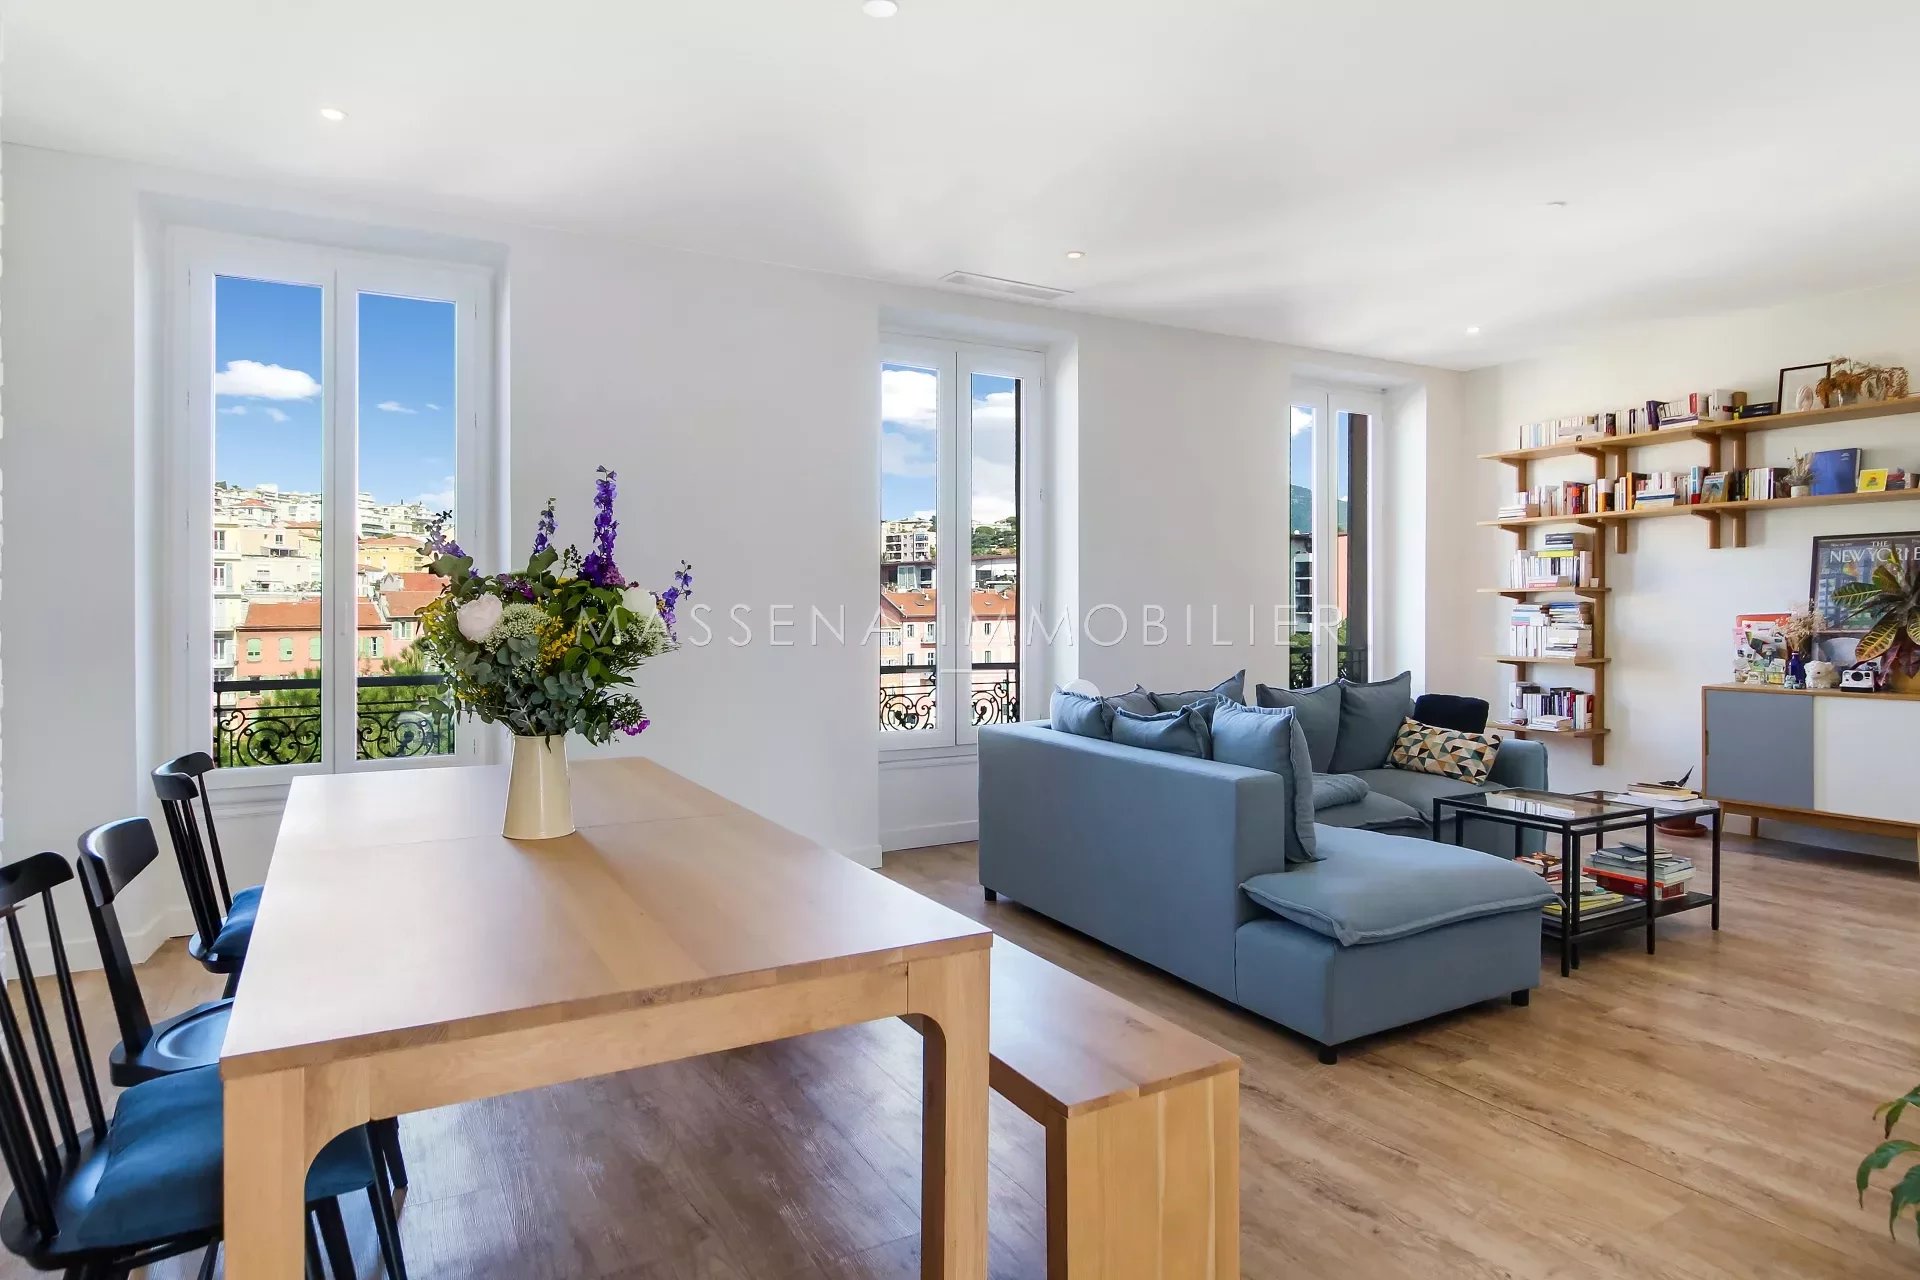 Nice République Coulée Verte - Renovated 2 bedroom apartment with balcony and panoramic view